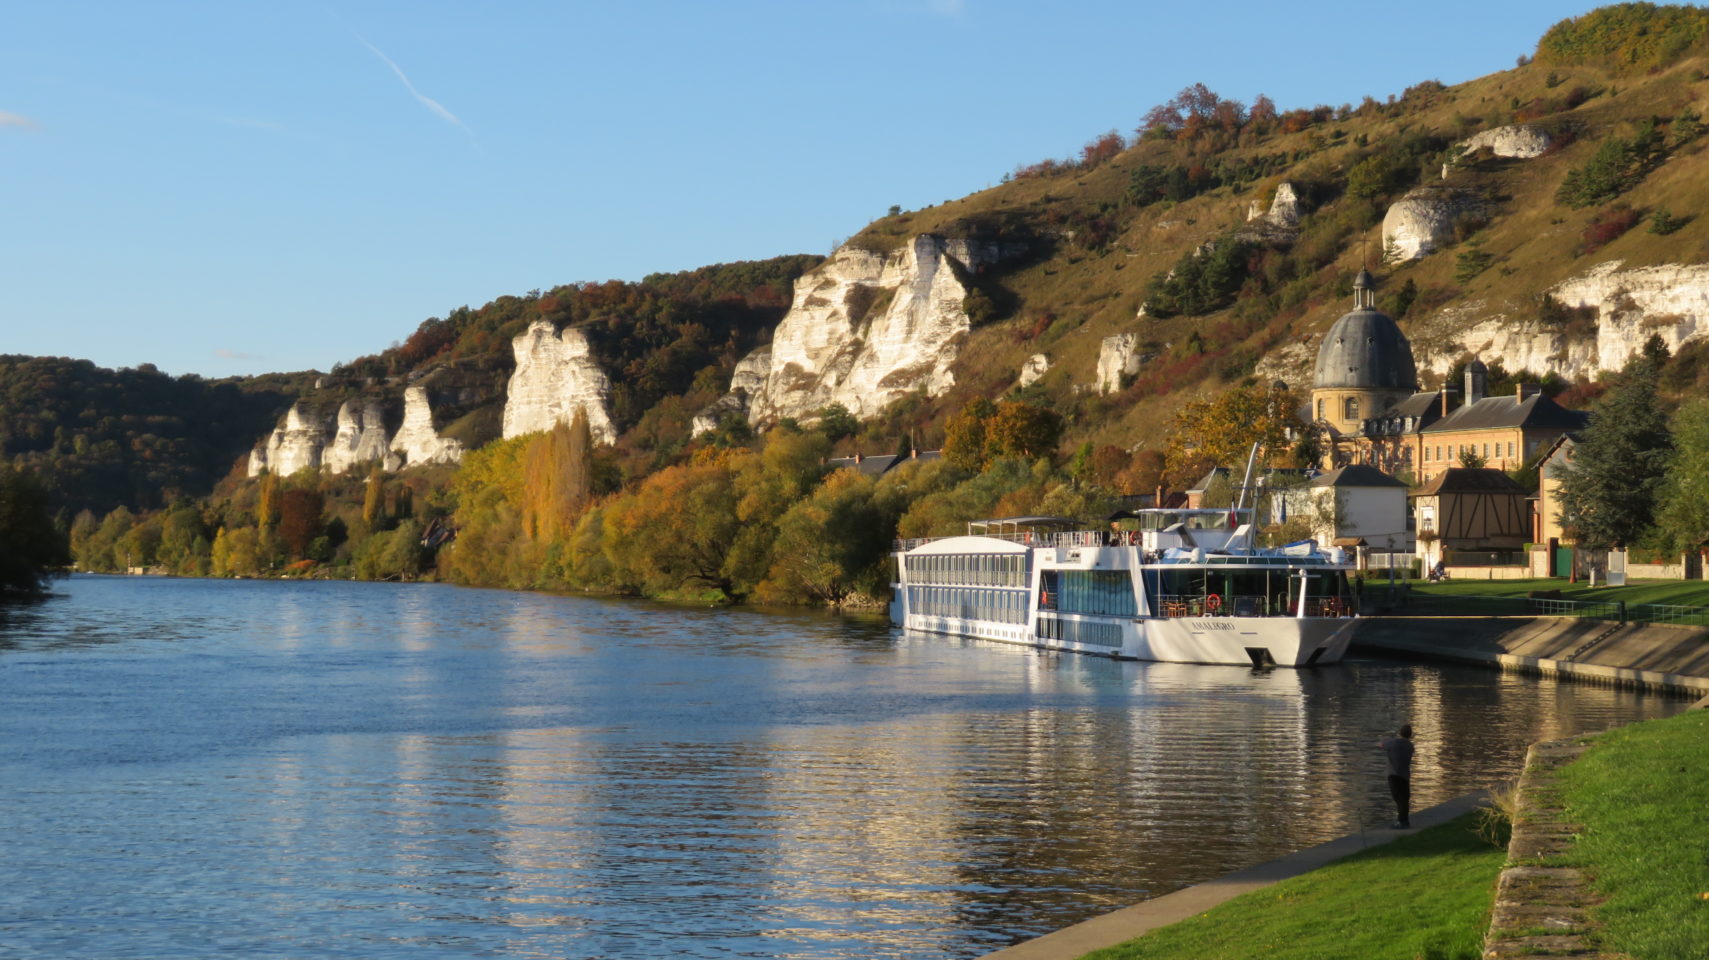 AMALegro docked along the beautiful Seine River in Normandie, France (Paris and Normandie AMAWaterways Cruise)